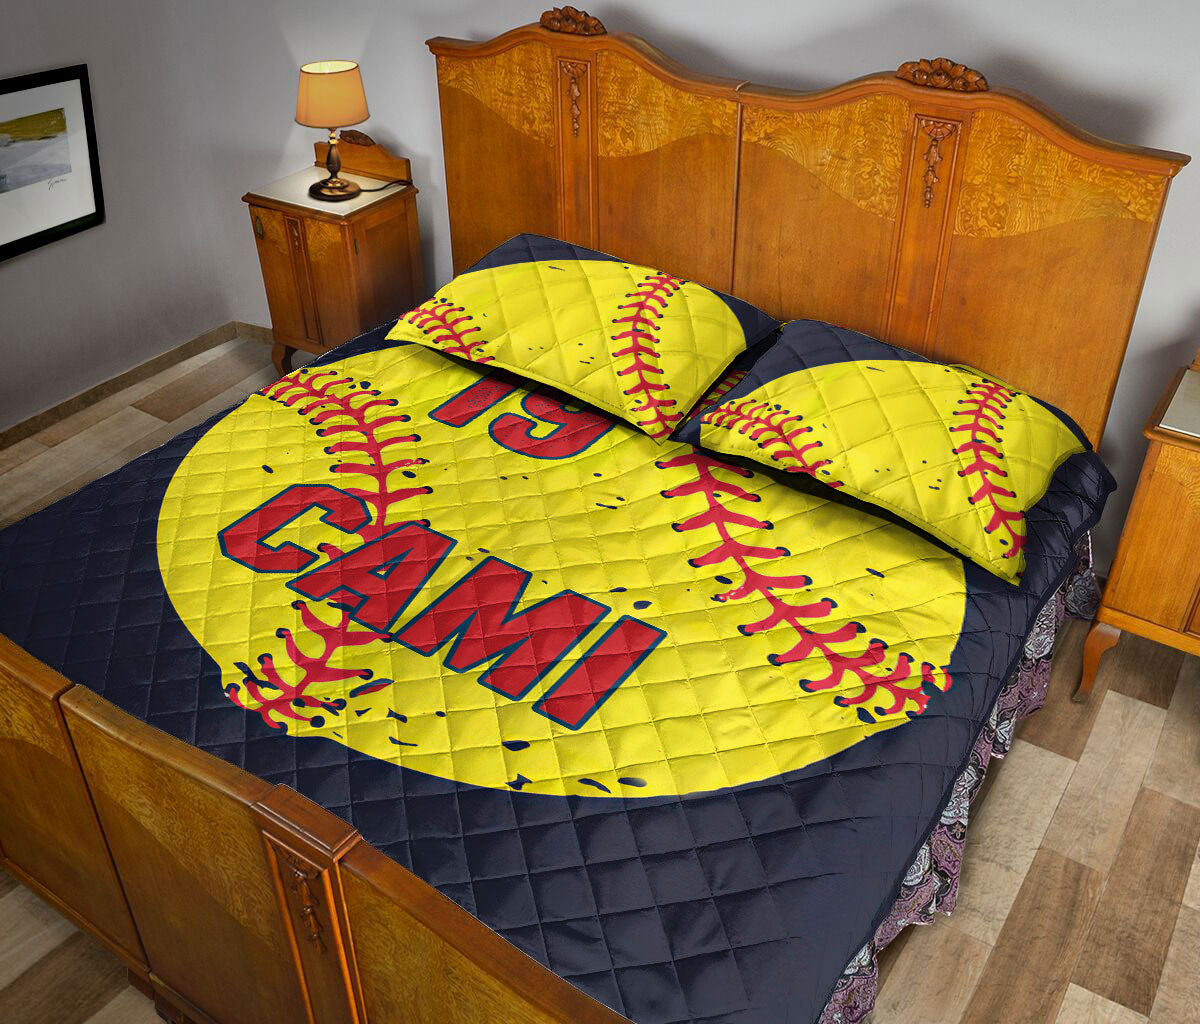 Ohaprints-Quilt-Bed-Set-Pillowcase-Softball-Black-Yellow-Ball-Gift-For-Fan-Lovers-Custom-Personalized-Name-Number-Blanket-Bedspread-Bedding-316-Queen (80'' x 90'')